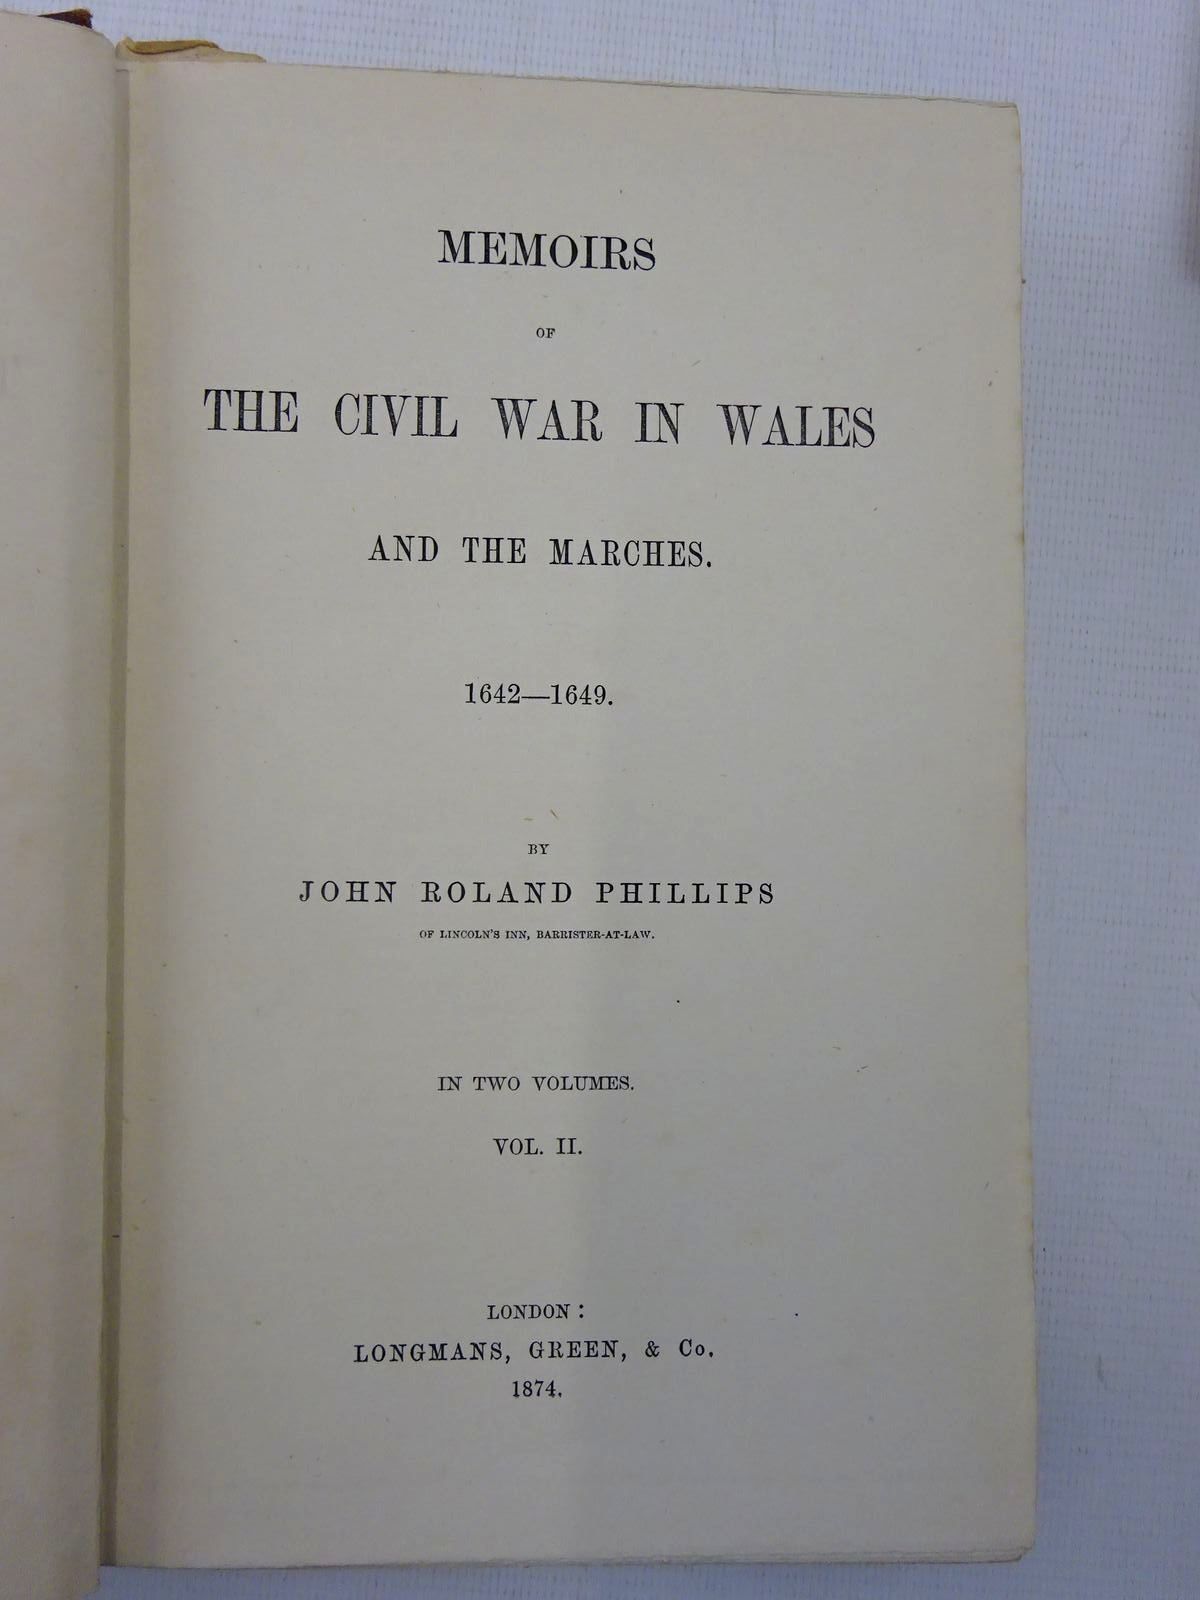 Photo of MEMOIRS OF THE CIVIL WAR IN WALES AND THE MARCHES 1642-1649 (2 VOLUMES) written by Phillips, John Roland published by Longmans, Green & Co. (STOCK CODE: 2127590)  for sale by Stella & Rose's Books